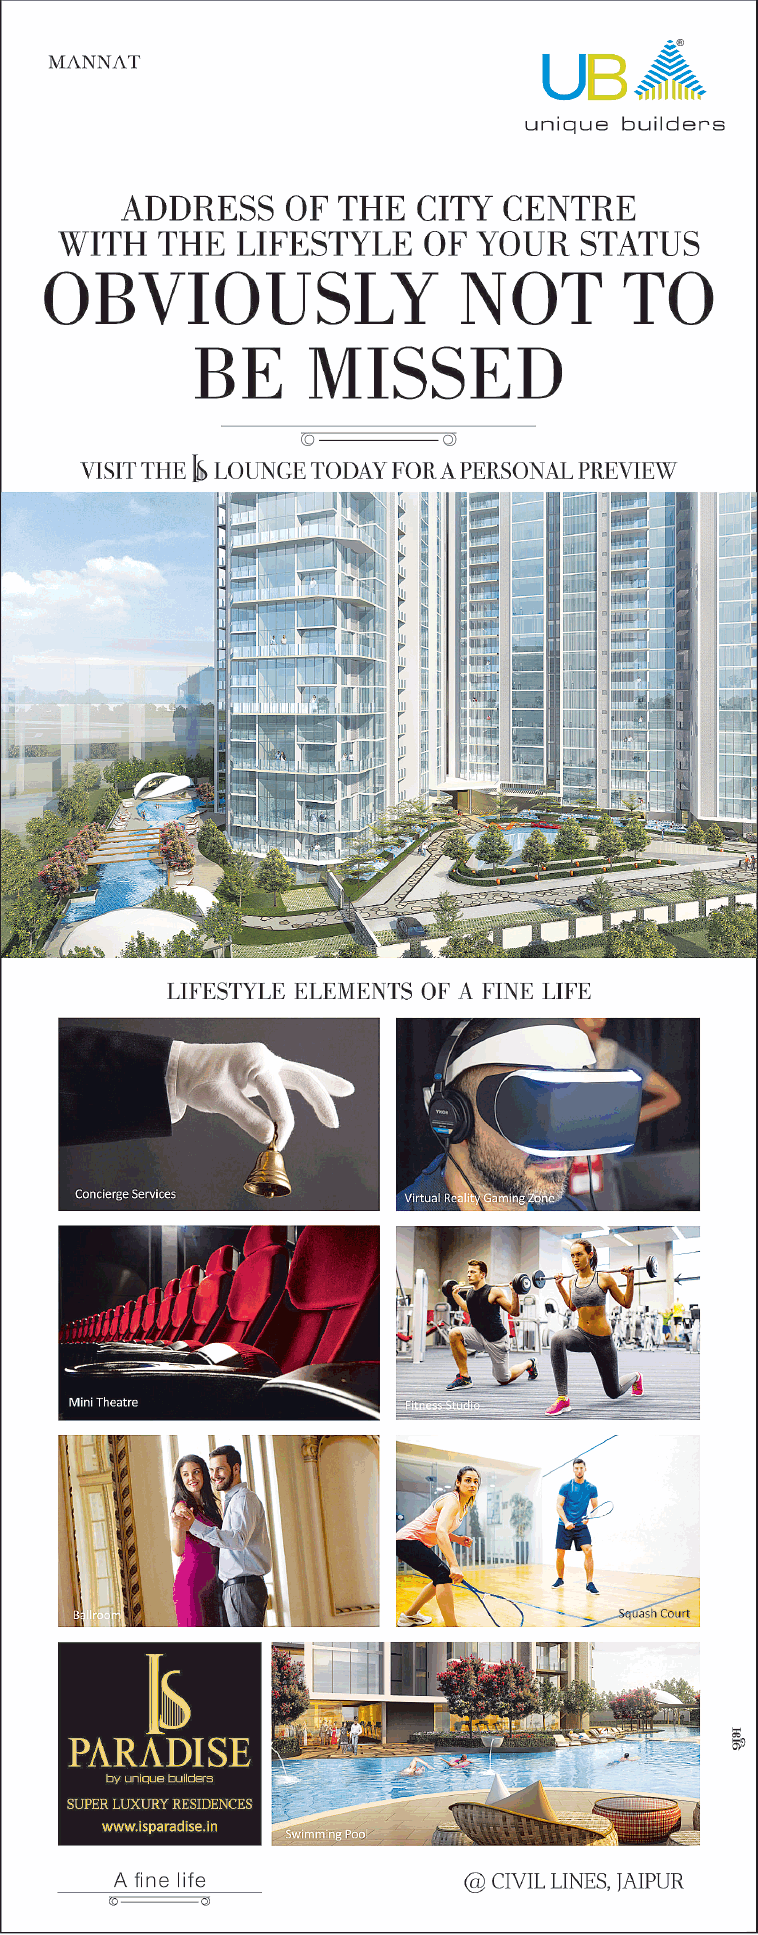 Unique Groups presents lifestyle elements of a fine life at IS Paradise in Jaipur Update